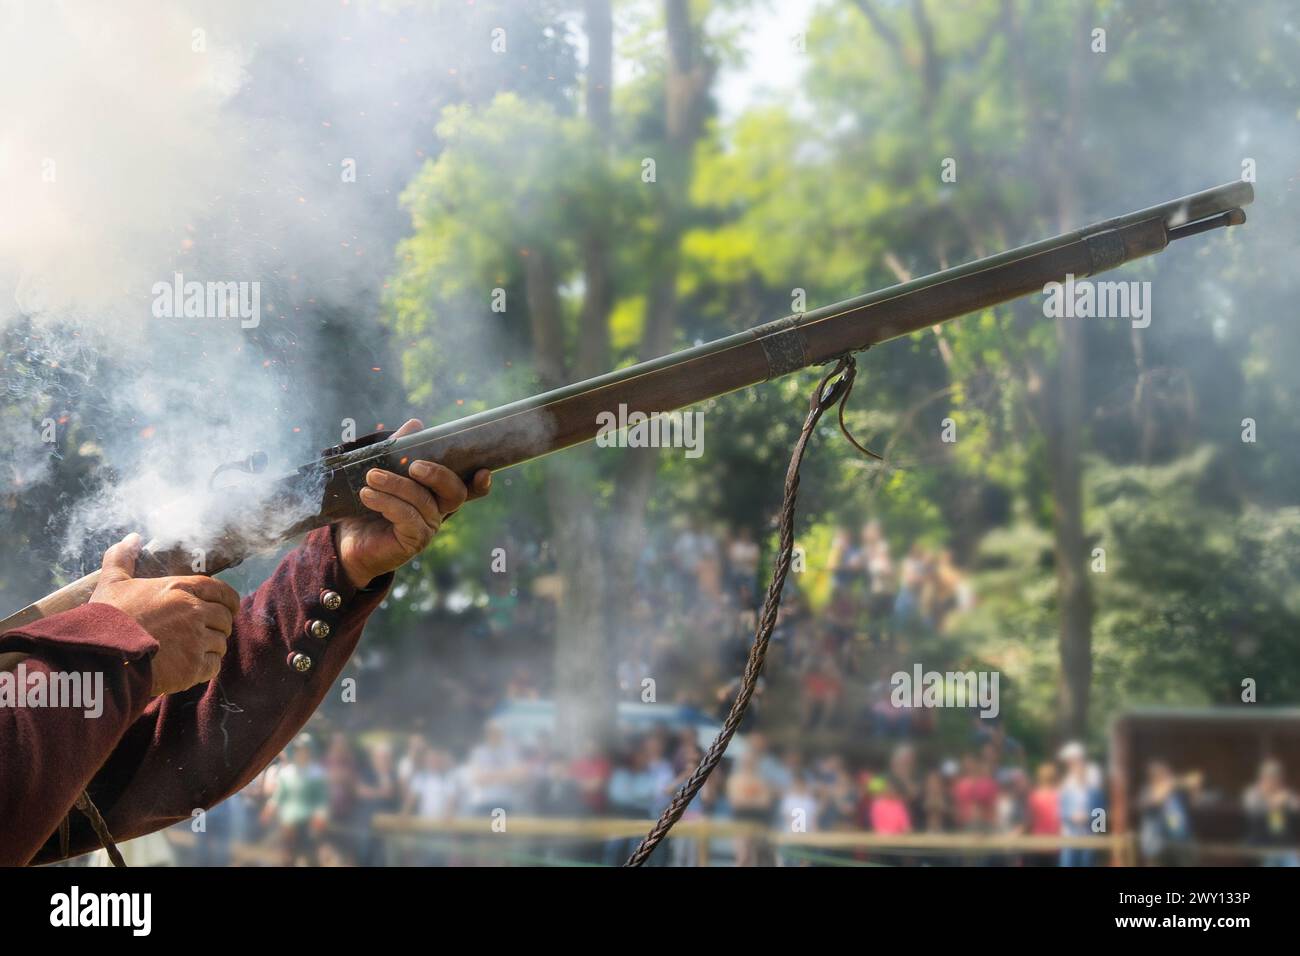 The flint firing mechanism of a medieval rifle in a man's hand Stock Photo